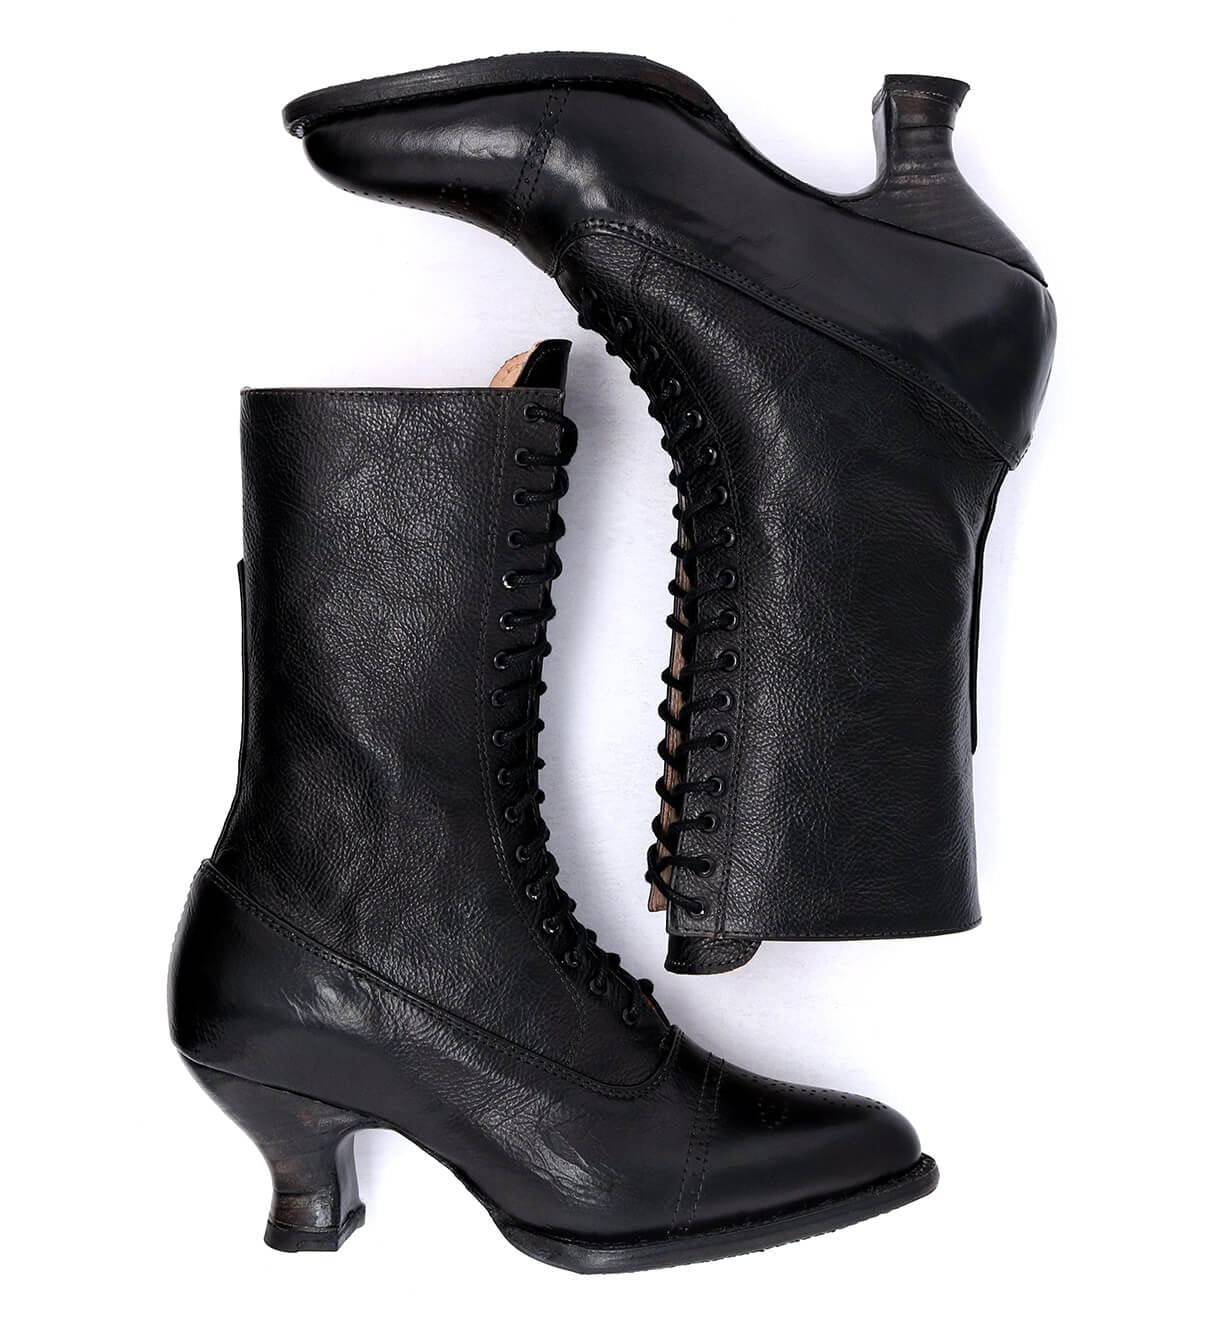 Oak Tree Farms Mirabelle, a pair of black leather boots on a white background.